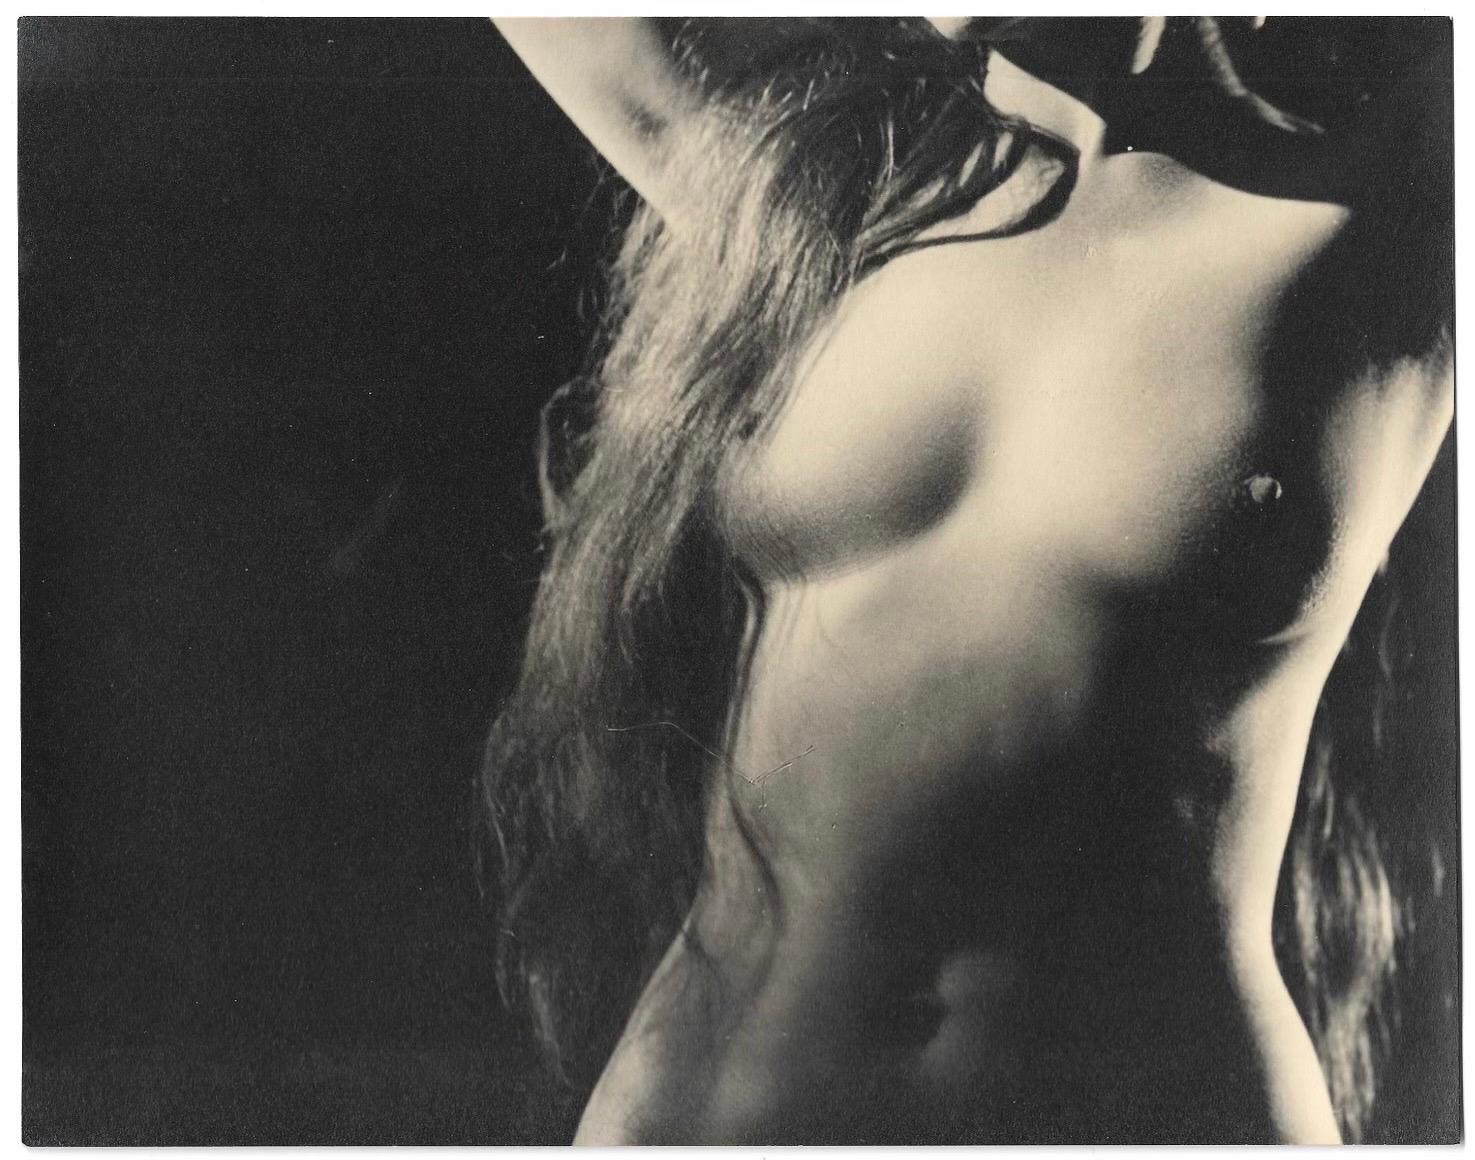 Black & White Photograph of a Female Nude by Contemporary American Photographer For Sale 2